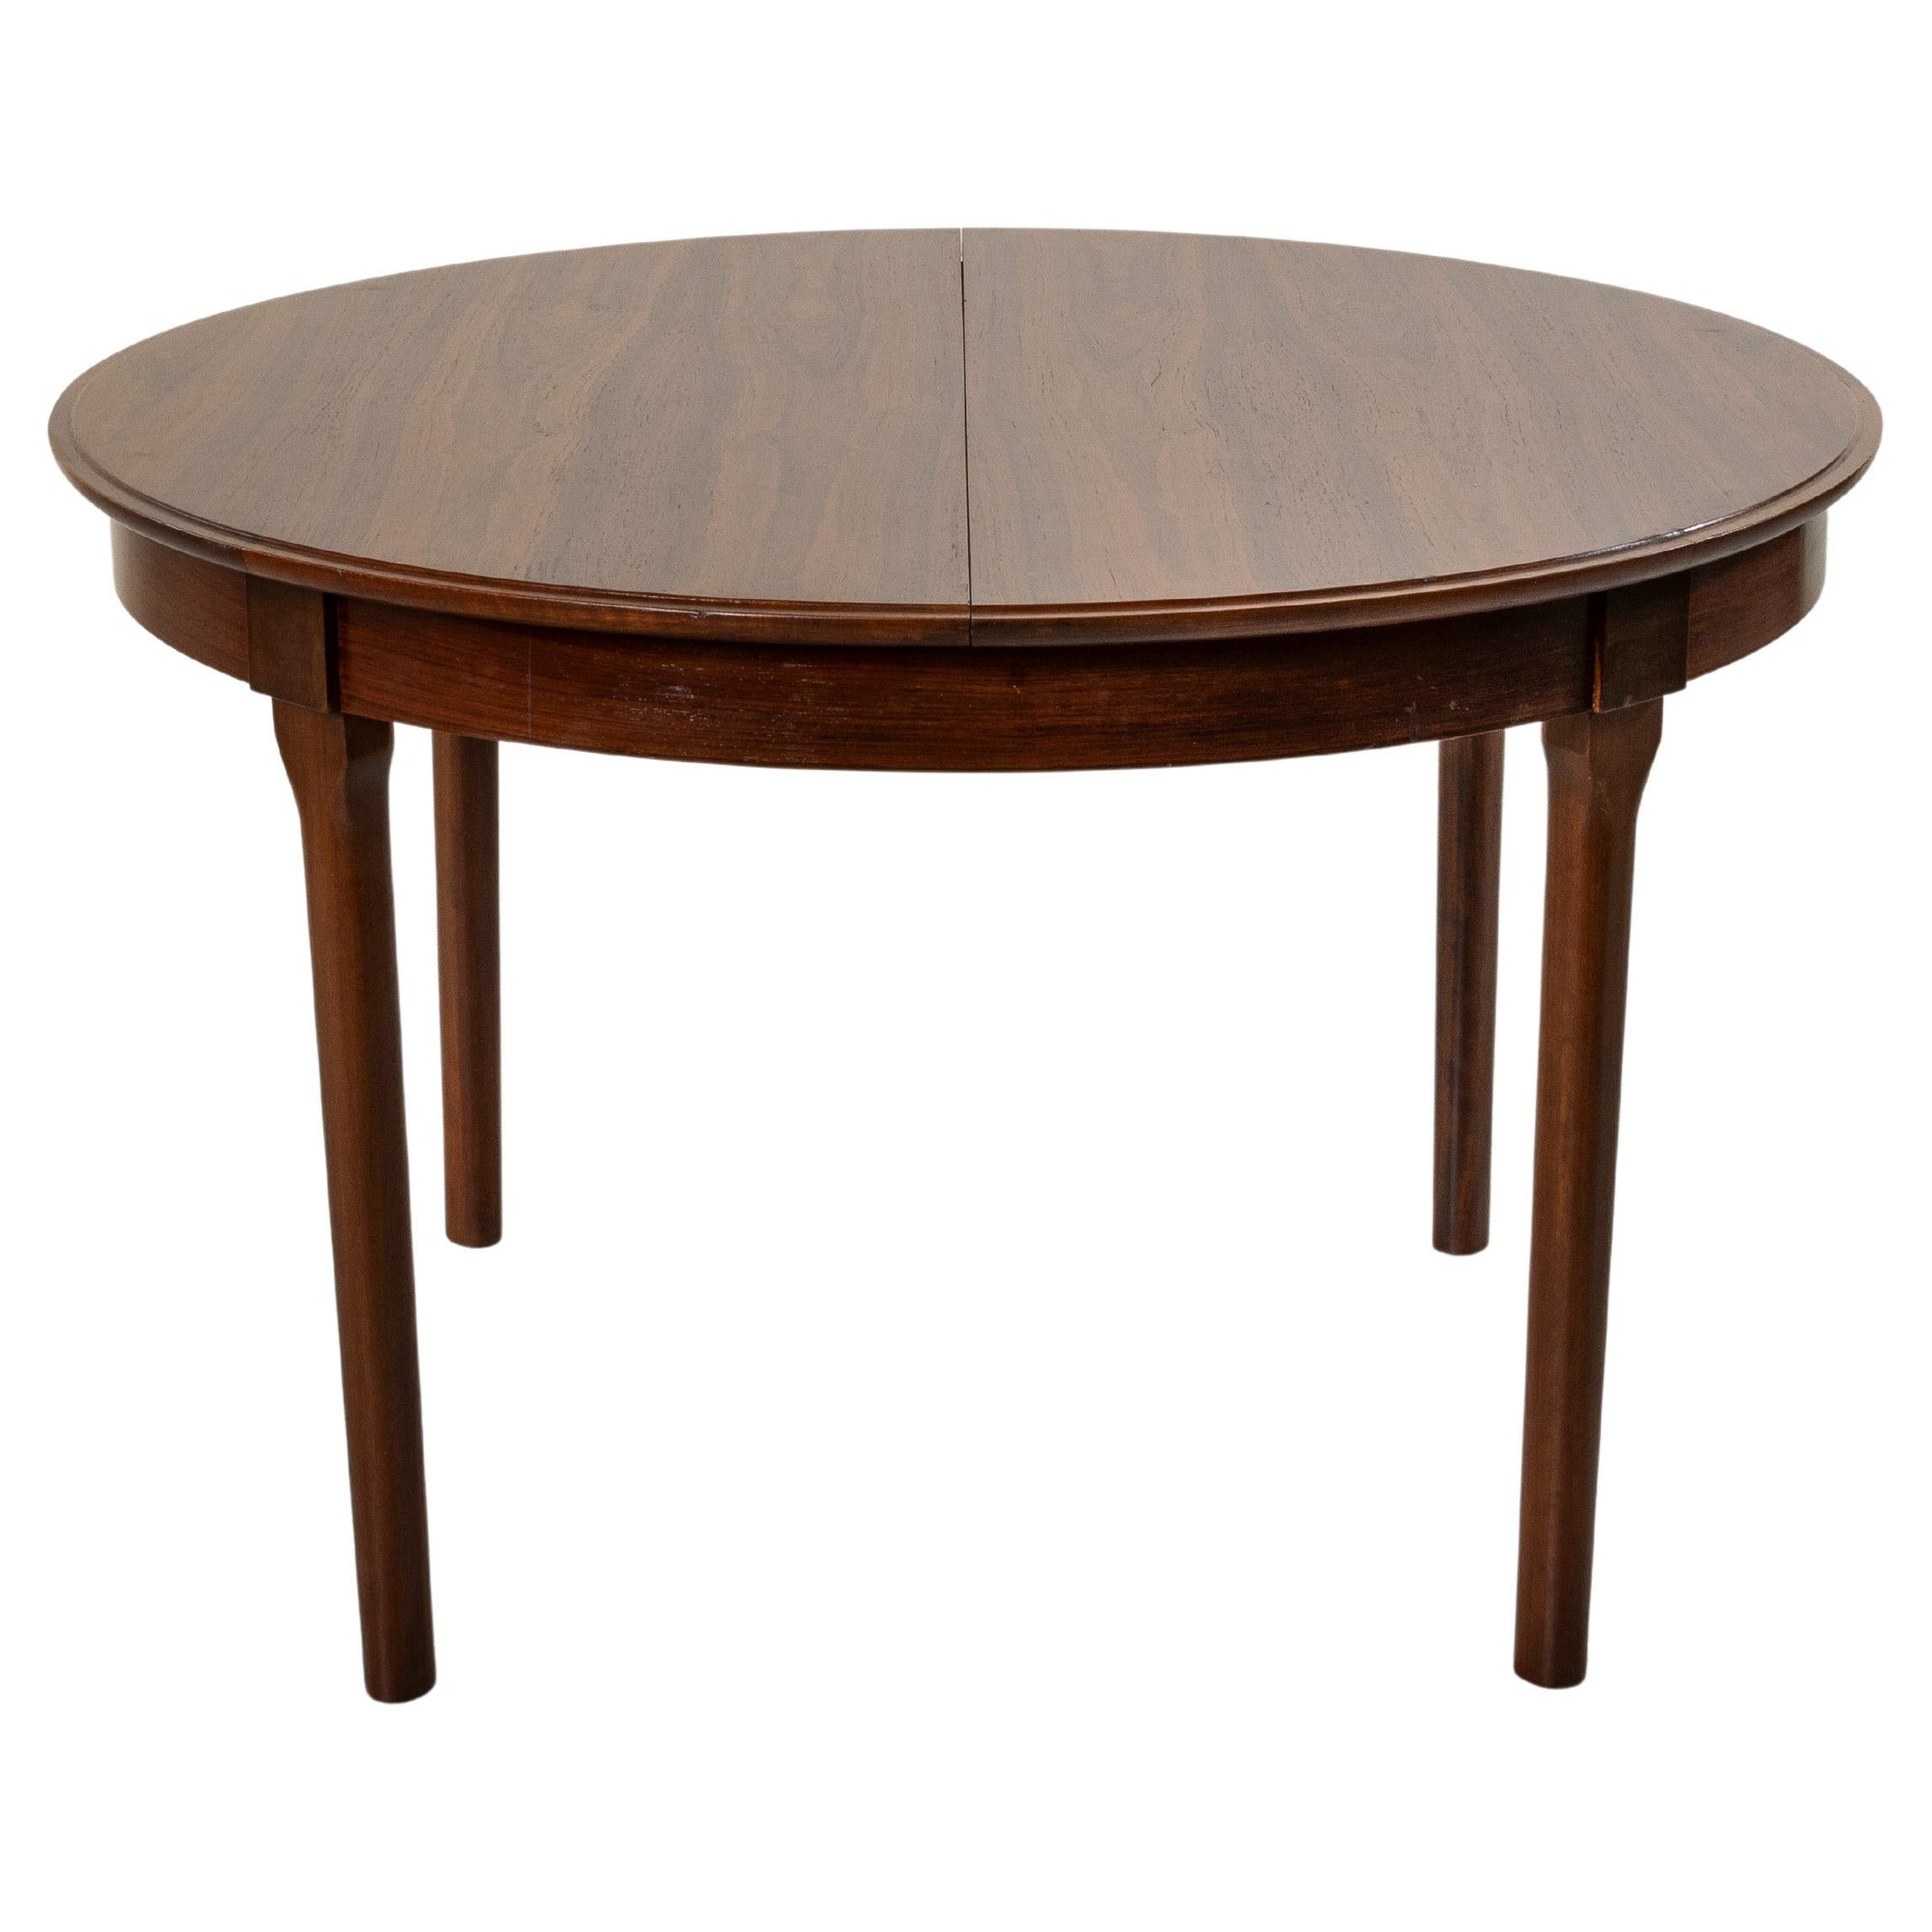 Mid-20th Century Danish Rosewood Round to Oval Dining Table, Collapsible Leaf For Sale